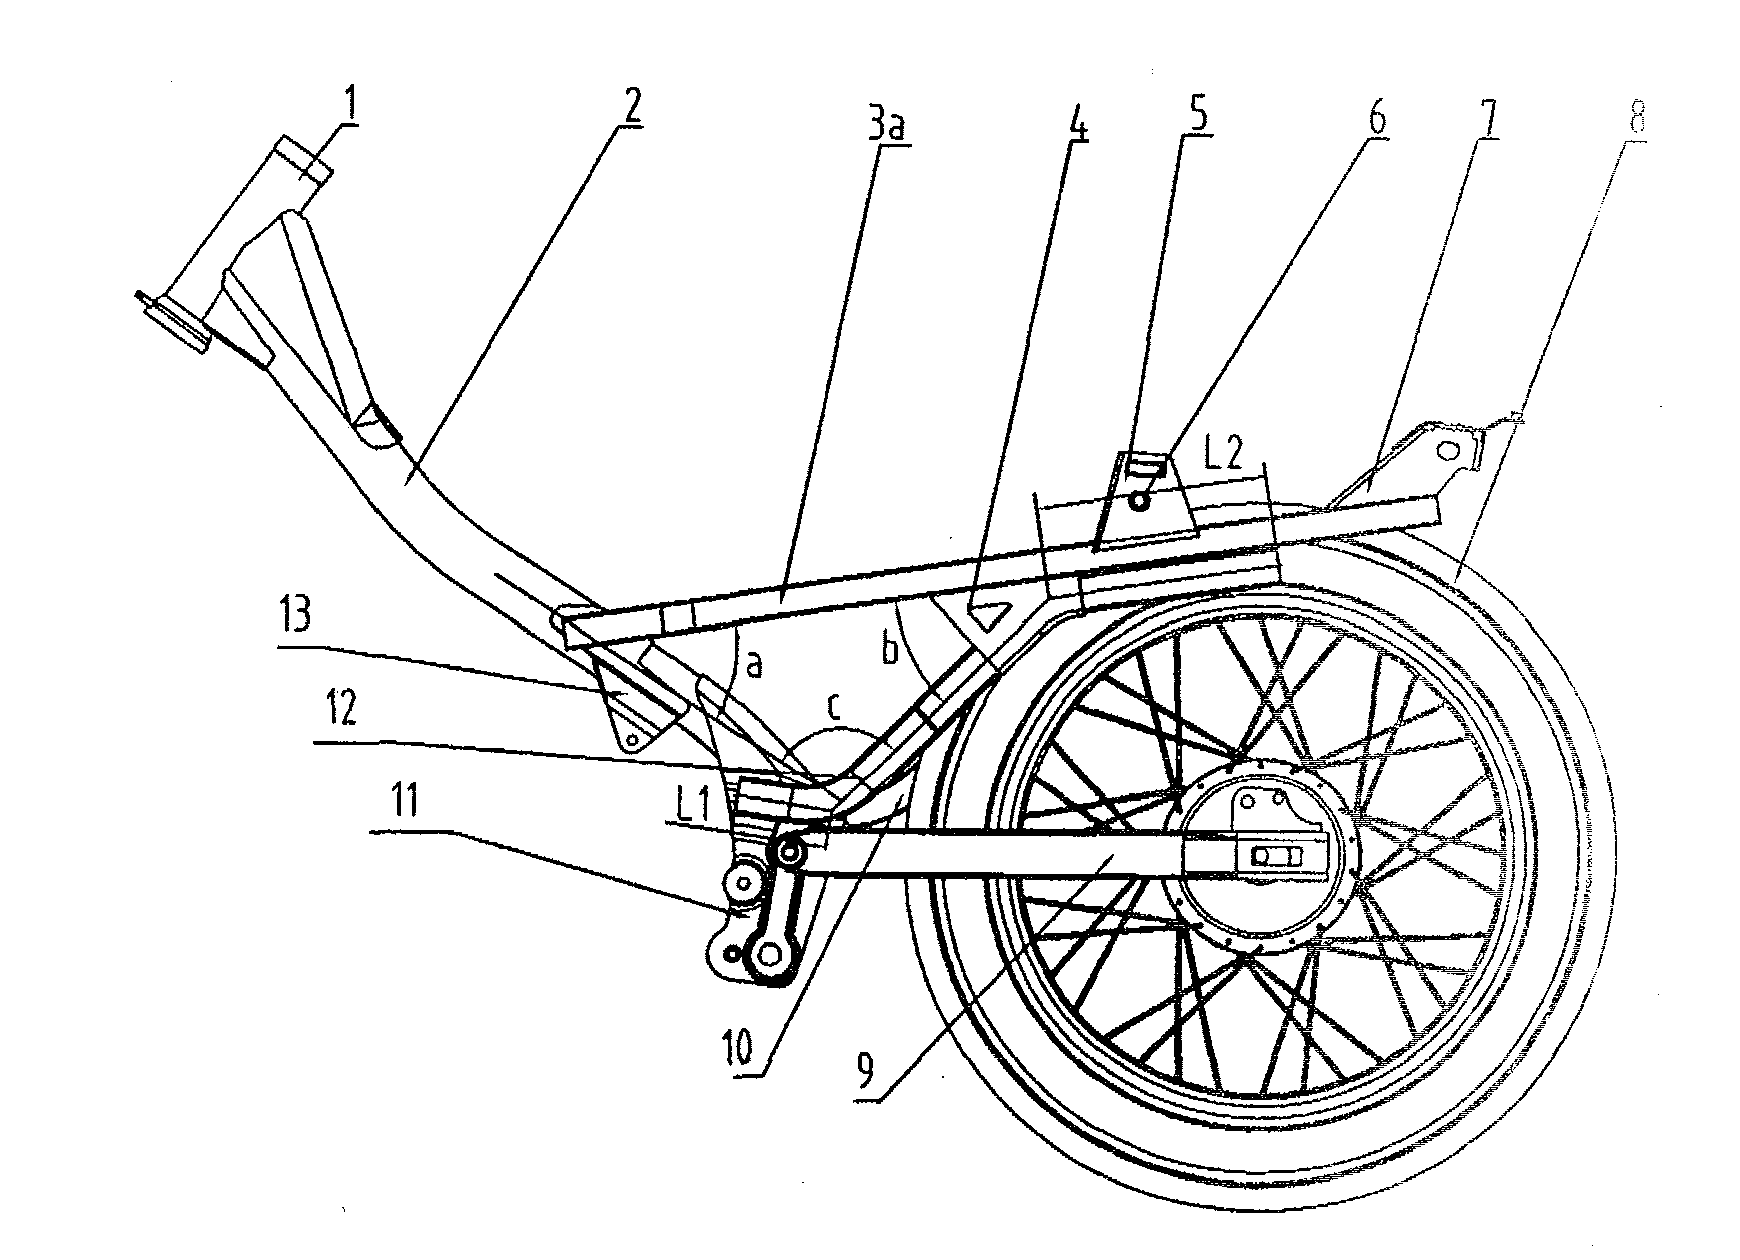 Motorcycle frame with bent beam